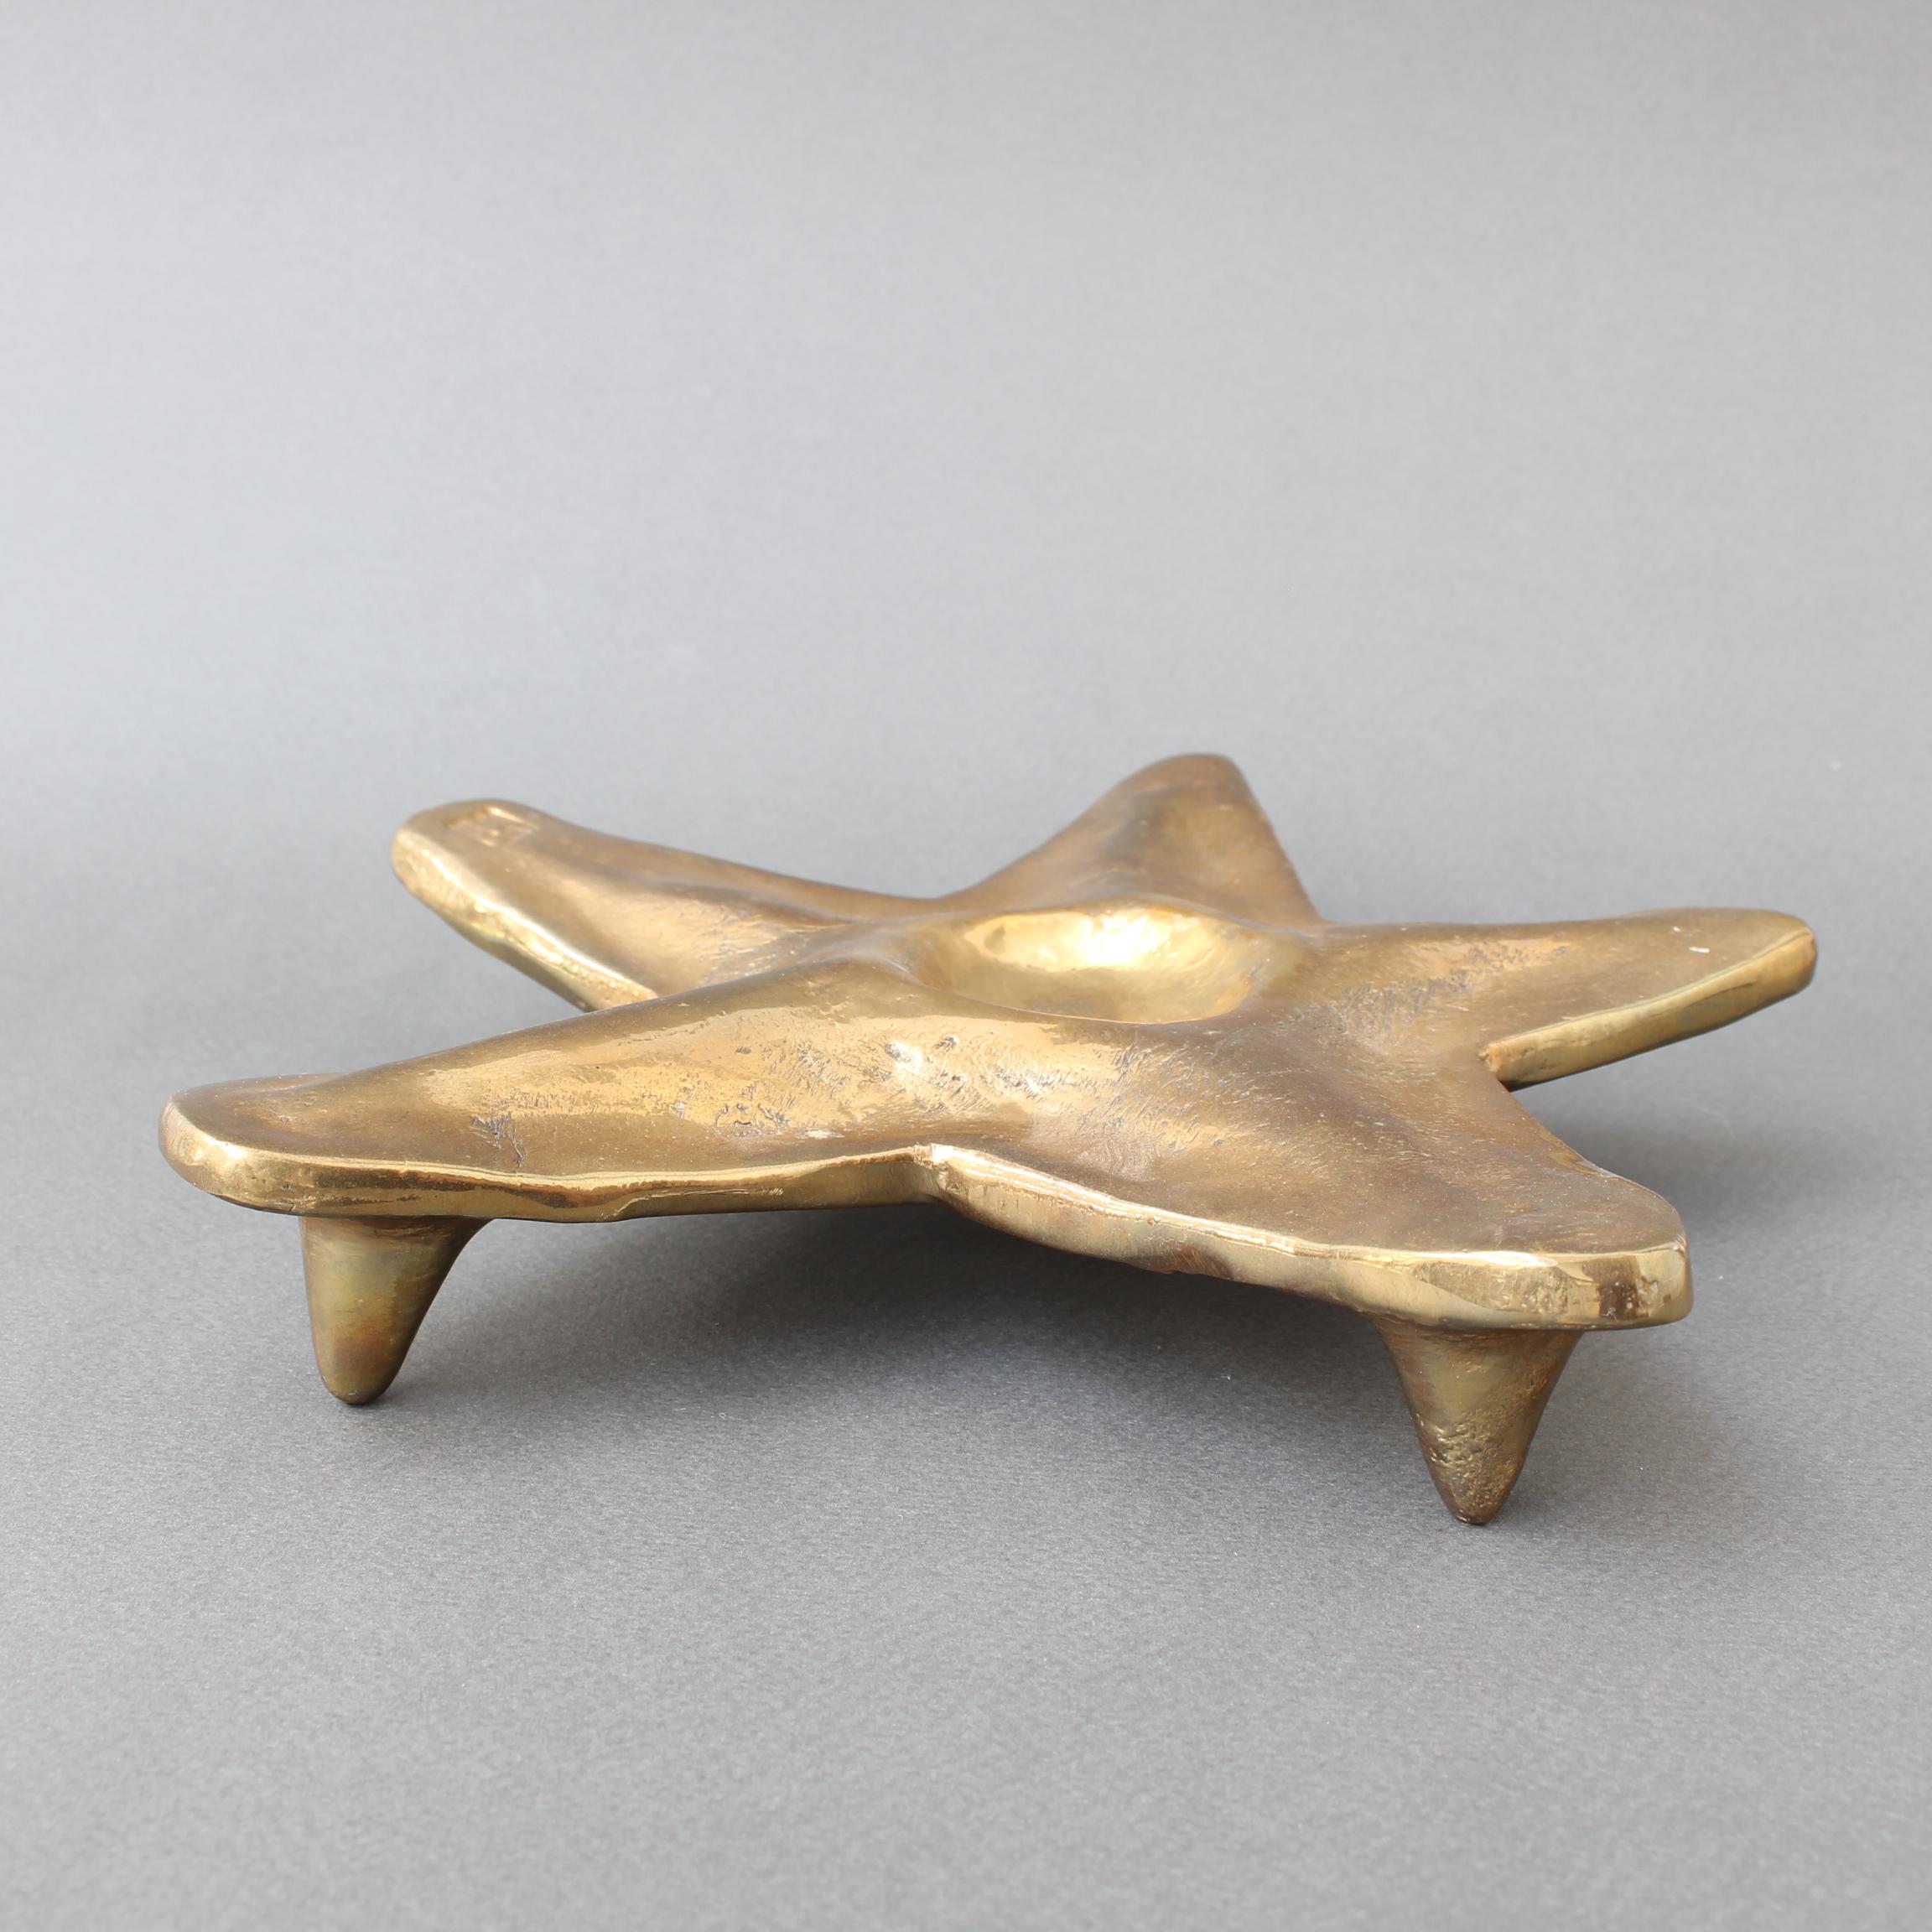 Late 20th Century Decorative Brass Trivet in Starfish Motif by David Marshall 'circa 1990s' For Sale